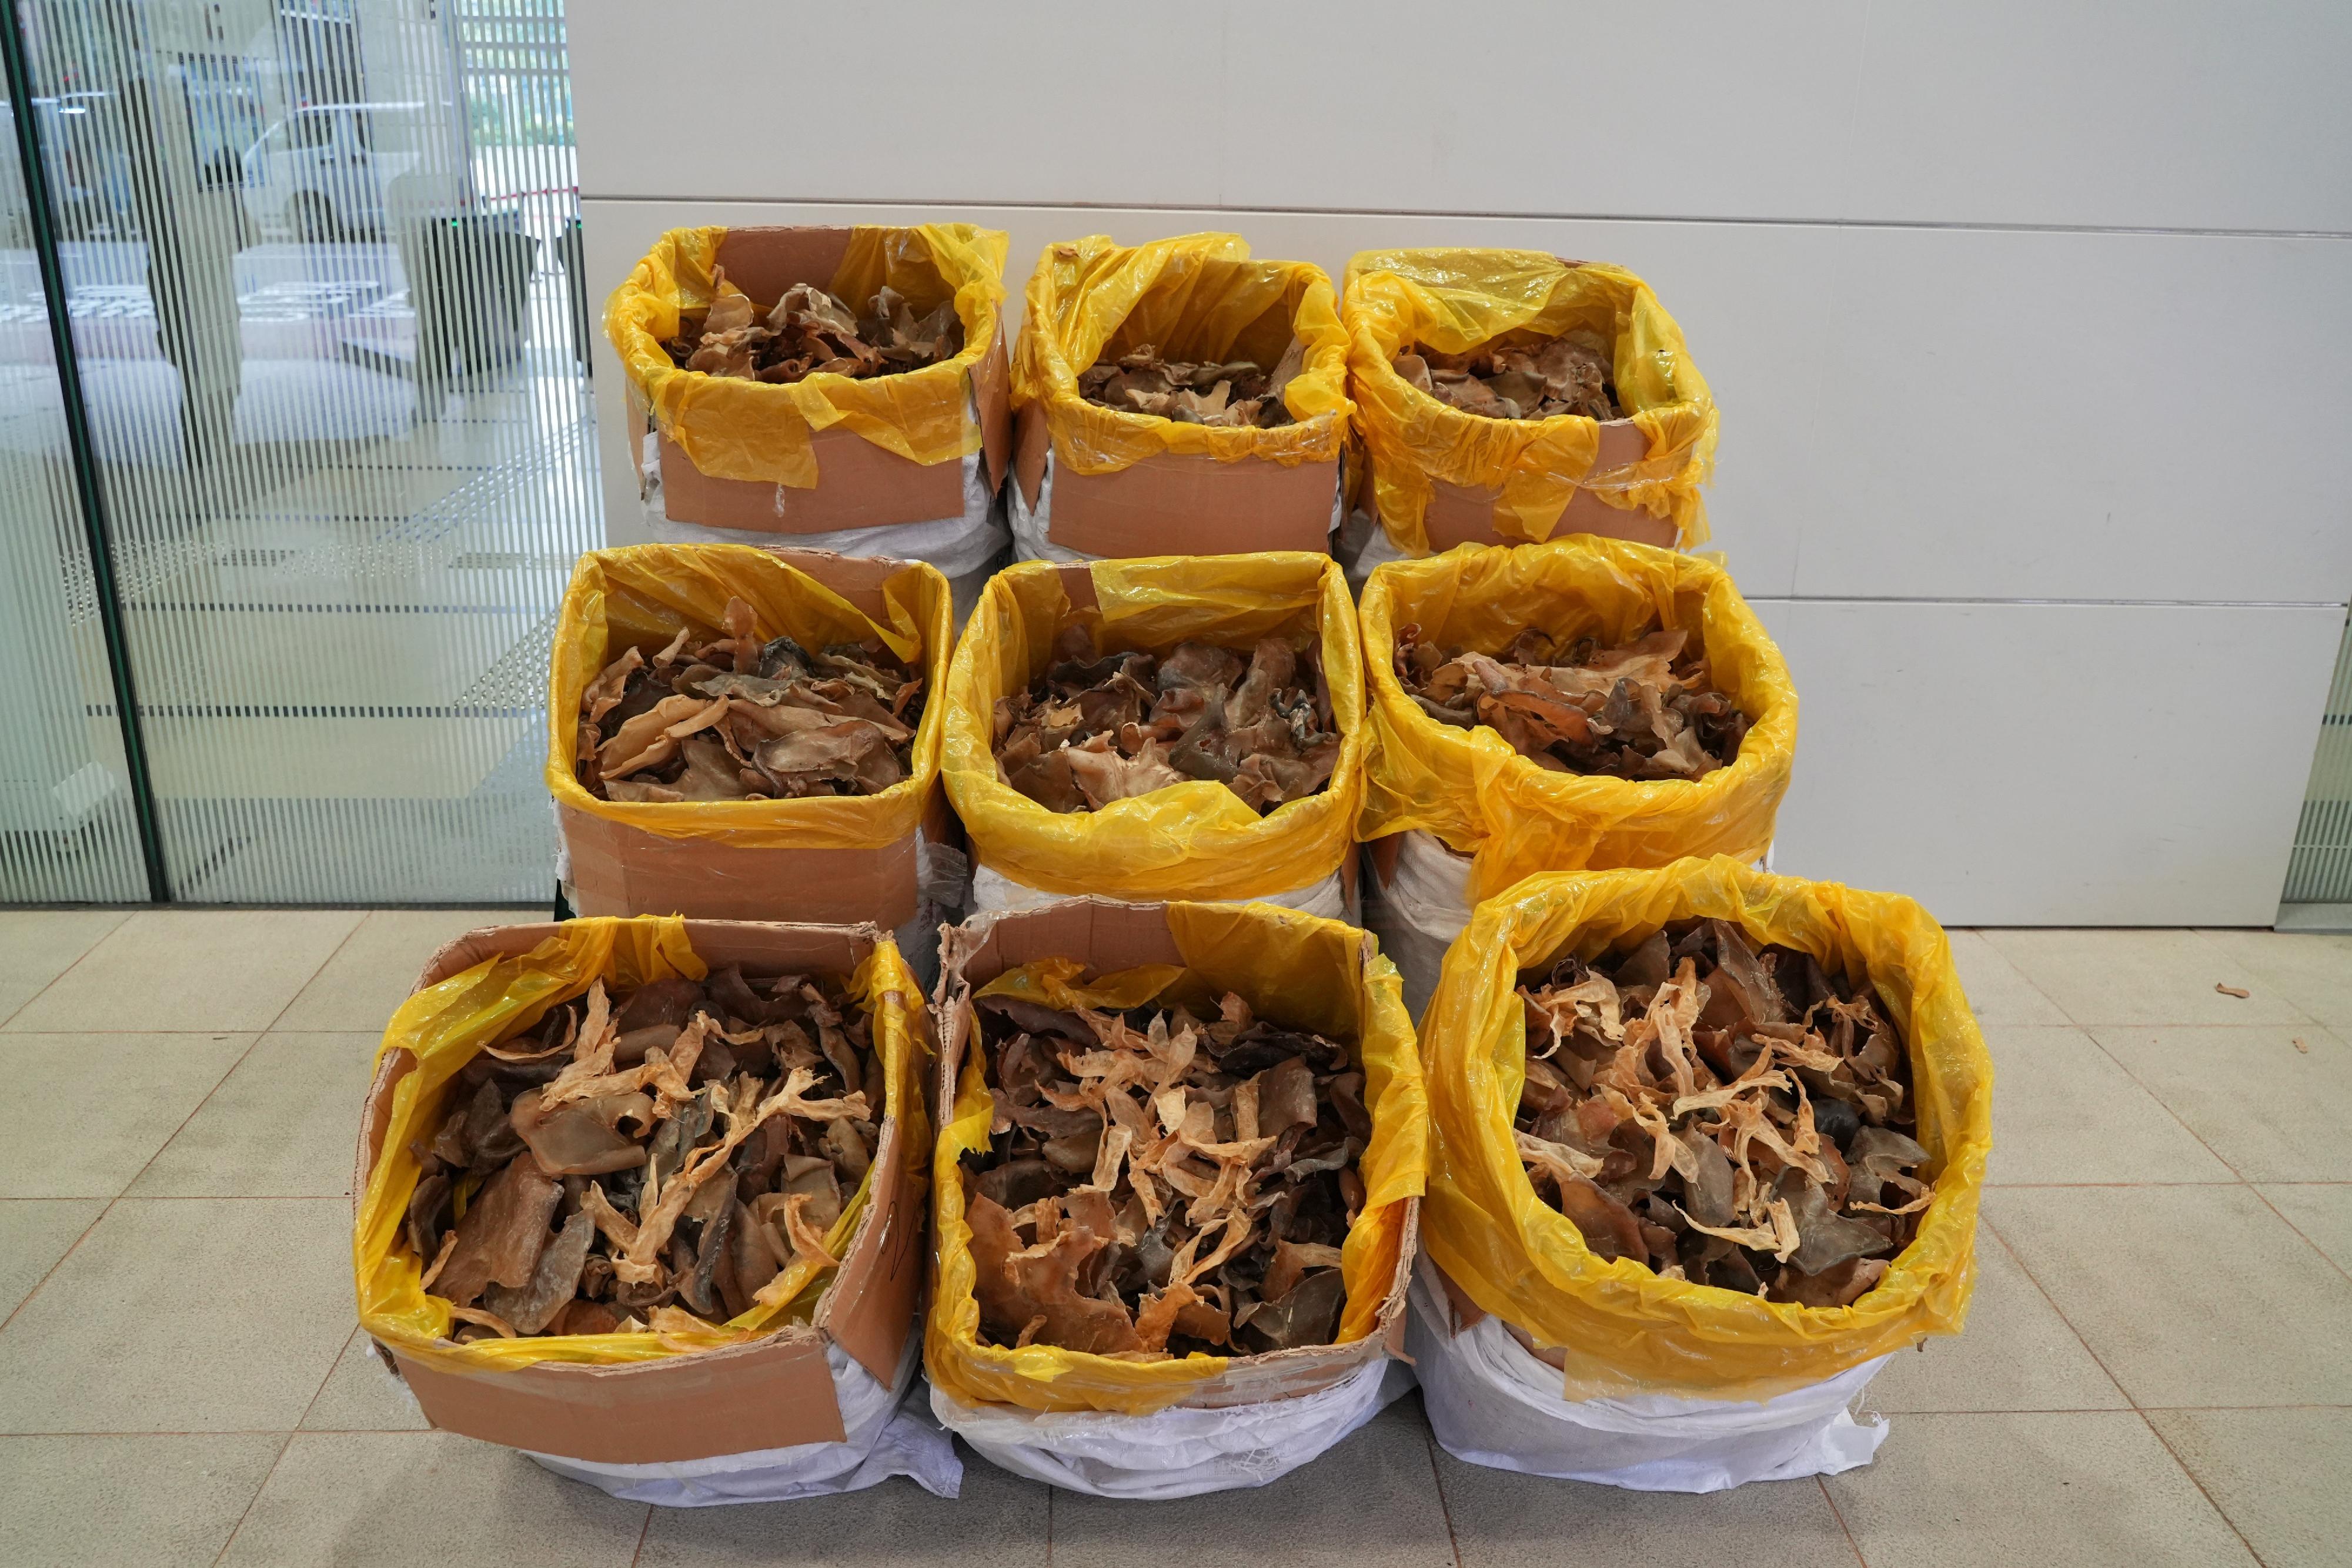 Hong Kong Customs detected two illegal import cases of suspected scheduled endangered species at Hong Kong International Airport on March 9. A total of about 270 kilograms of suspected scheduled dried fish maws and about 50kg of suspected scheduled dried shark fins, with an estimated market value of about $300,000, were seized. Photo shows the suspected scheduled dried fish maws, mix-loaded with a large quantity of non-scheduled dried fish maws, seized by Customs officers in the first case.